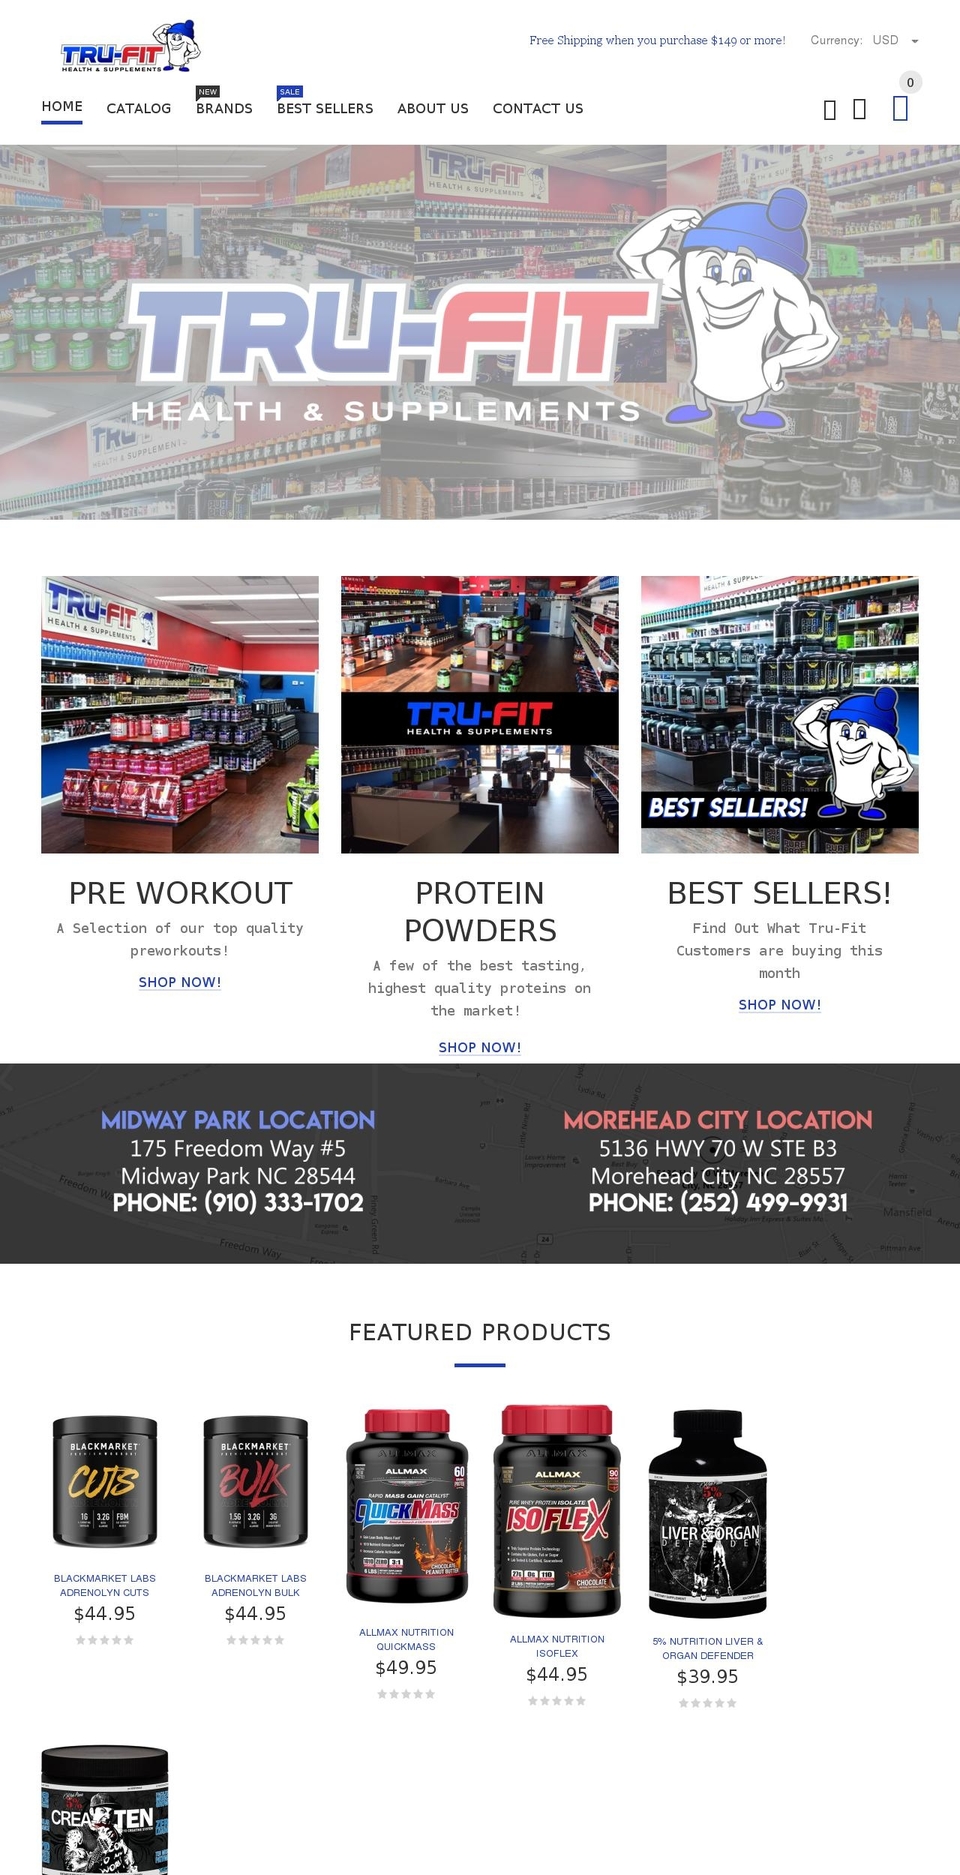 yourstore-v2-1-5 Shopify theme site example trufitsupplements.com